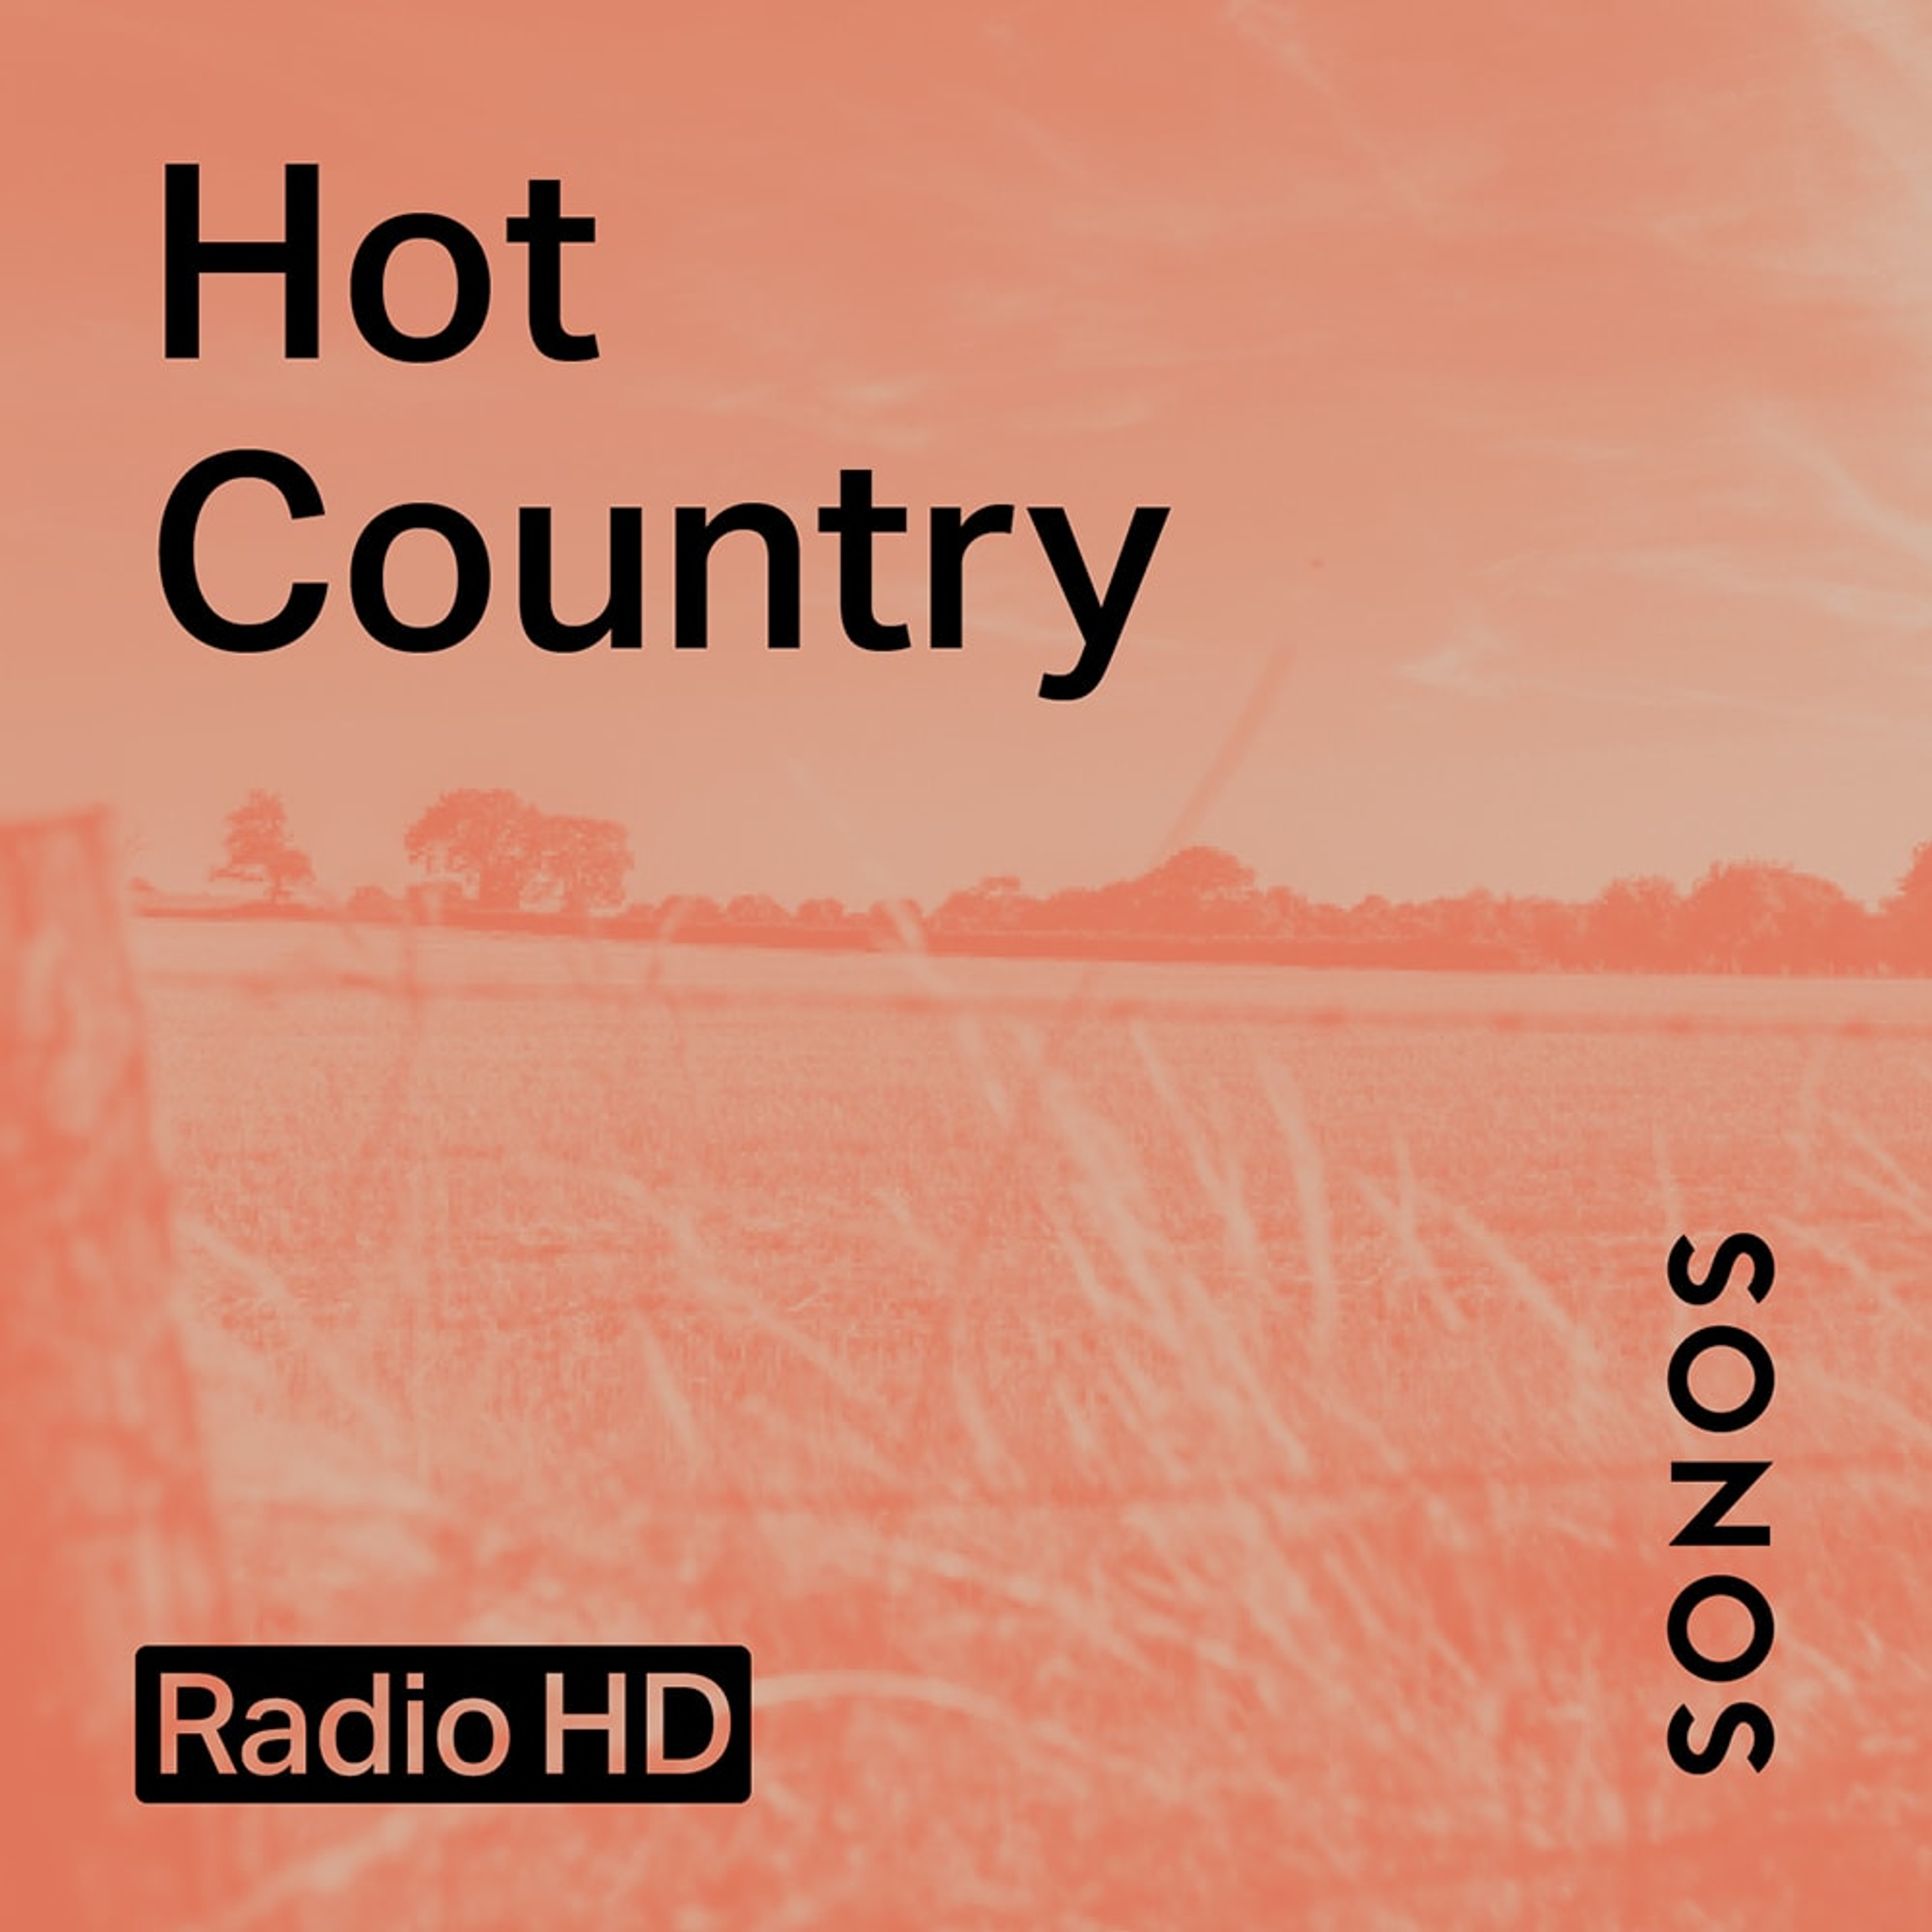 Hot Country radio station cover